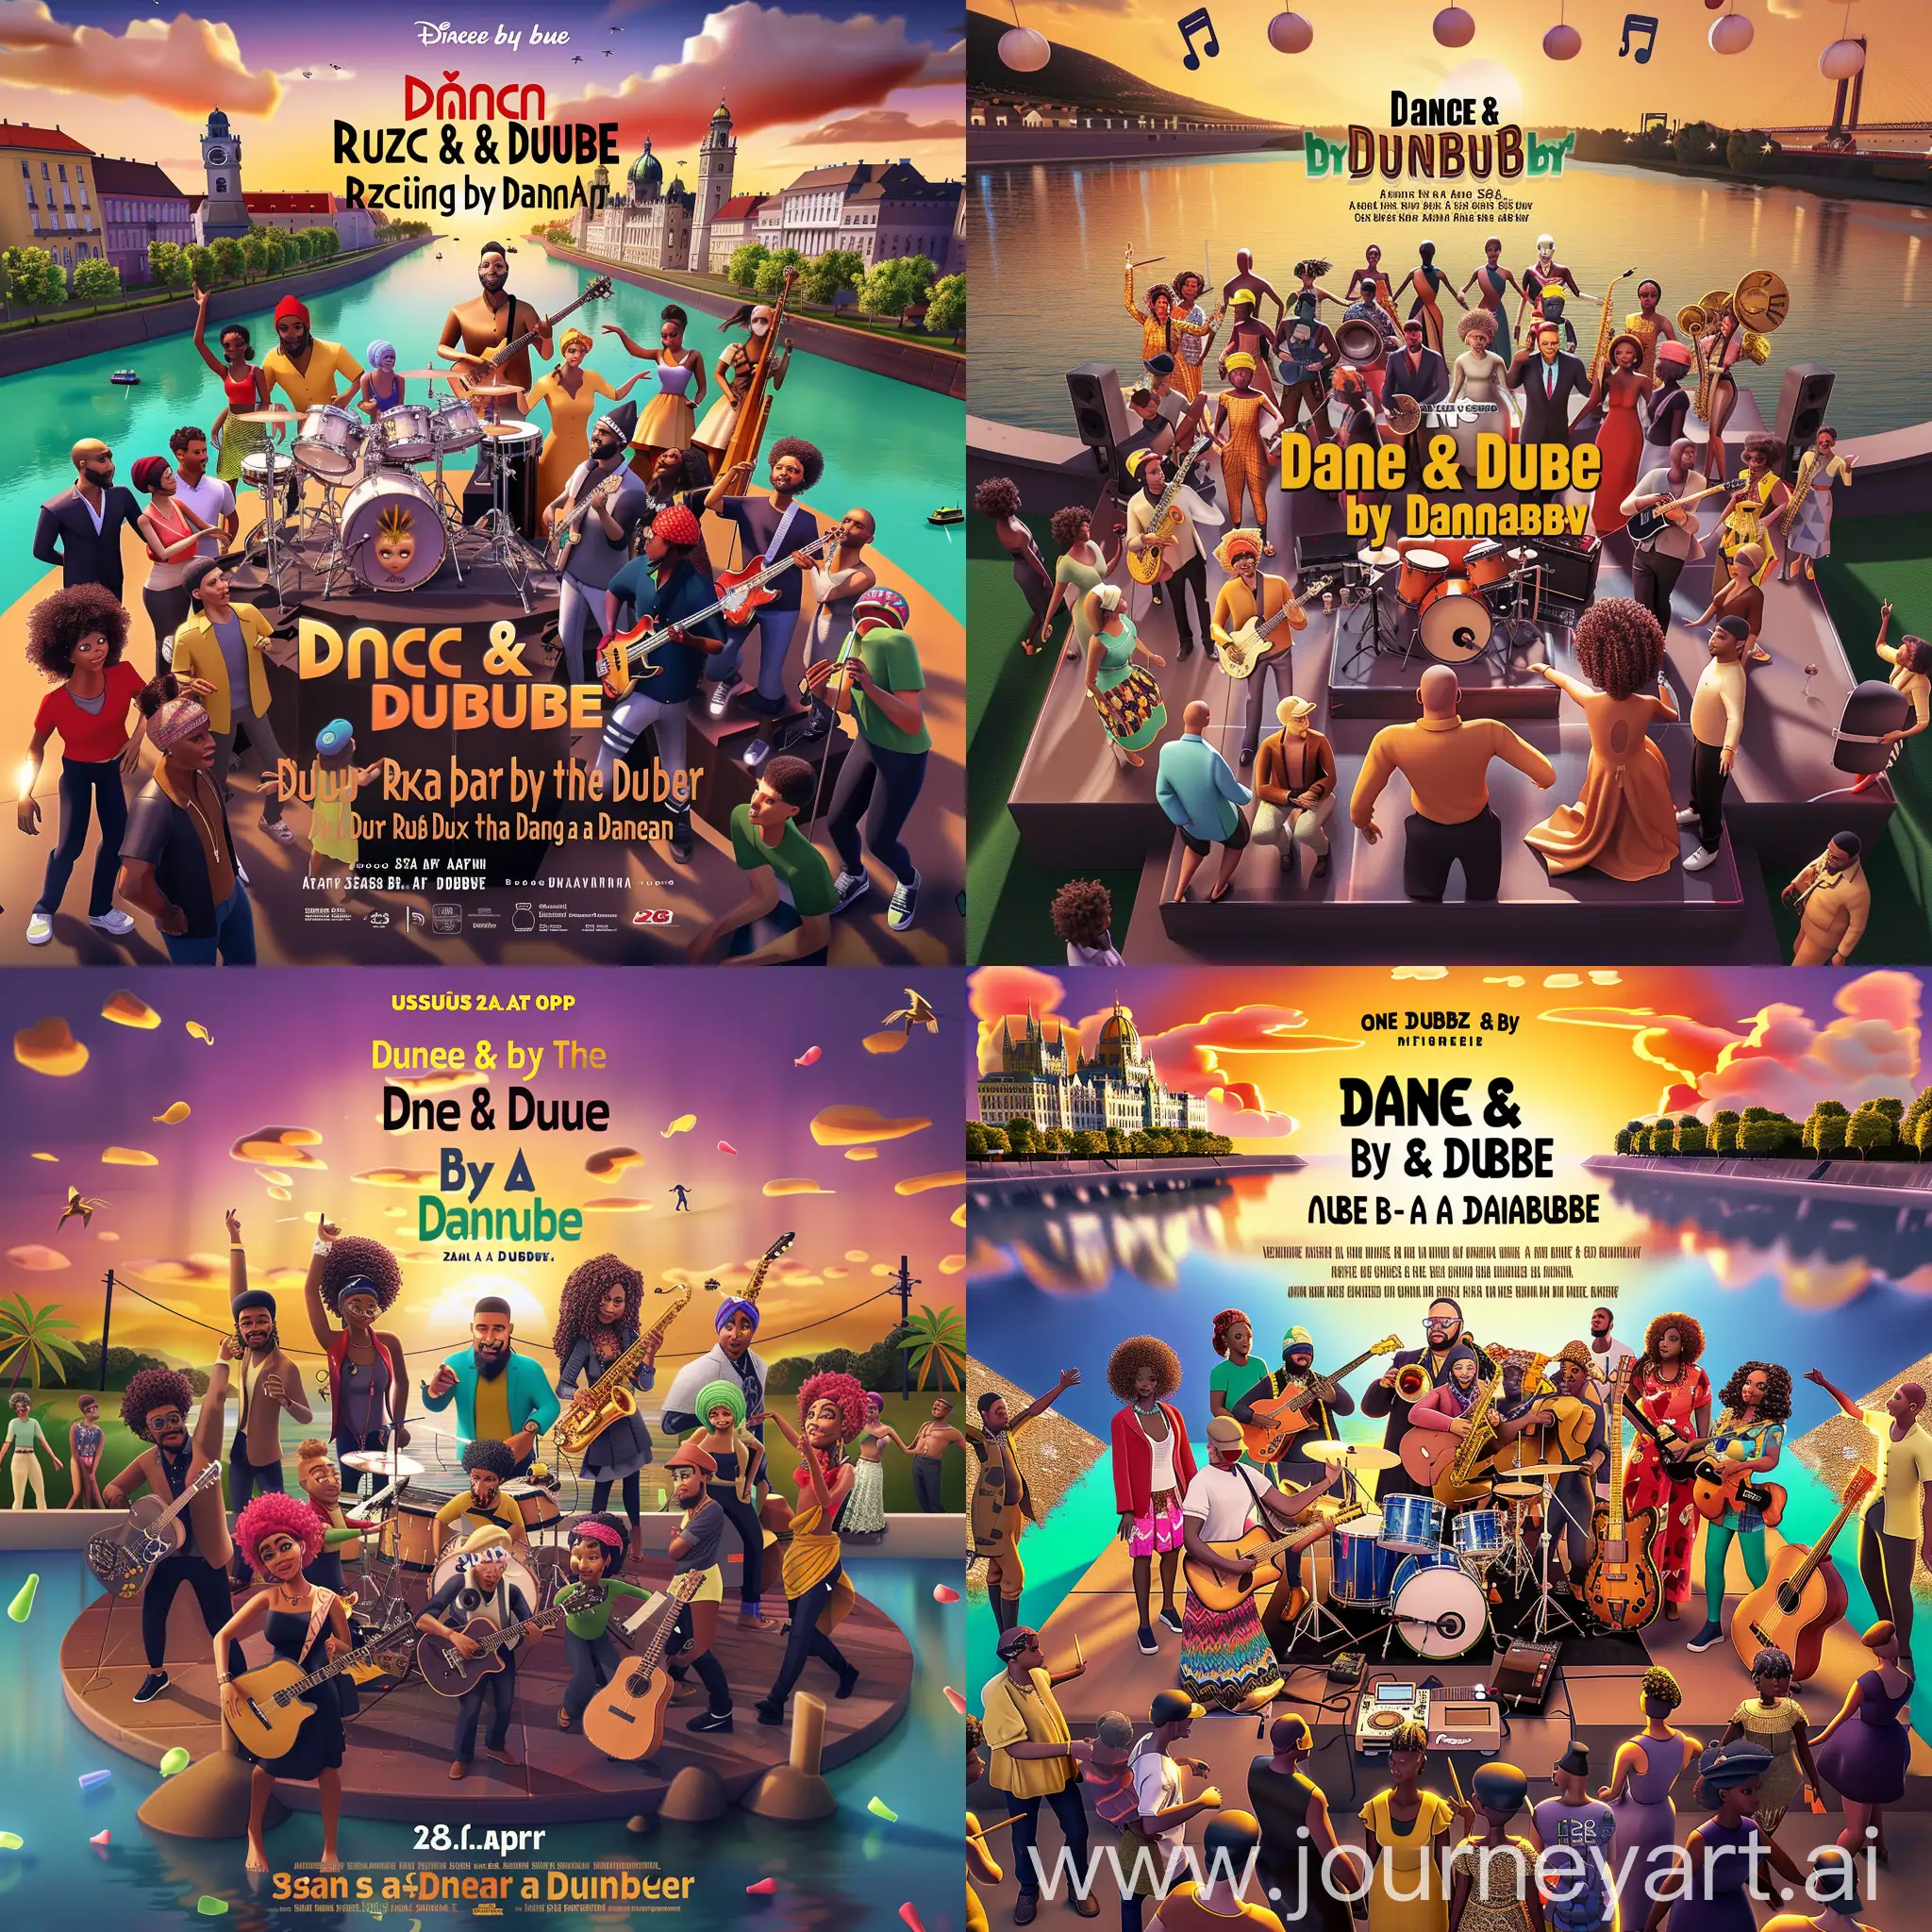 
A vibrant, 3D-rendered poster for the animated movie "Dance & Dub by the Danube" features a diverse, multi-cultural band on a stage by the river Usus am Wasser. The band consists of an Afro-Reggae-Dancehall group with a drummer, bassist, guitarist, saxophonist, percussionist, and kora player at the center. Surrounding them are singers sporting African, East Asian, and European styles, as well as a DJ and a mixer. The atmosphere is lively, with people dancing and interacting in a joyful, close-knit celebration. The movie's release date, "28. April," is prominently displayed in the center., 3d render

The musicians are surrounded by family and friends. One Love. Celebration. Gathering. The Title of the Event: 'Dance & Dub by the Danube' On TOP. Reggae, Rub A Dub, Dancehall. Sunset Colorfull, Dawn. Carrebean, Jamaica, Rastafari. 3d Render, cinematic, 3d render, fashion